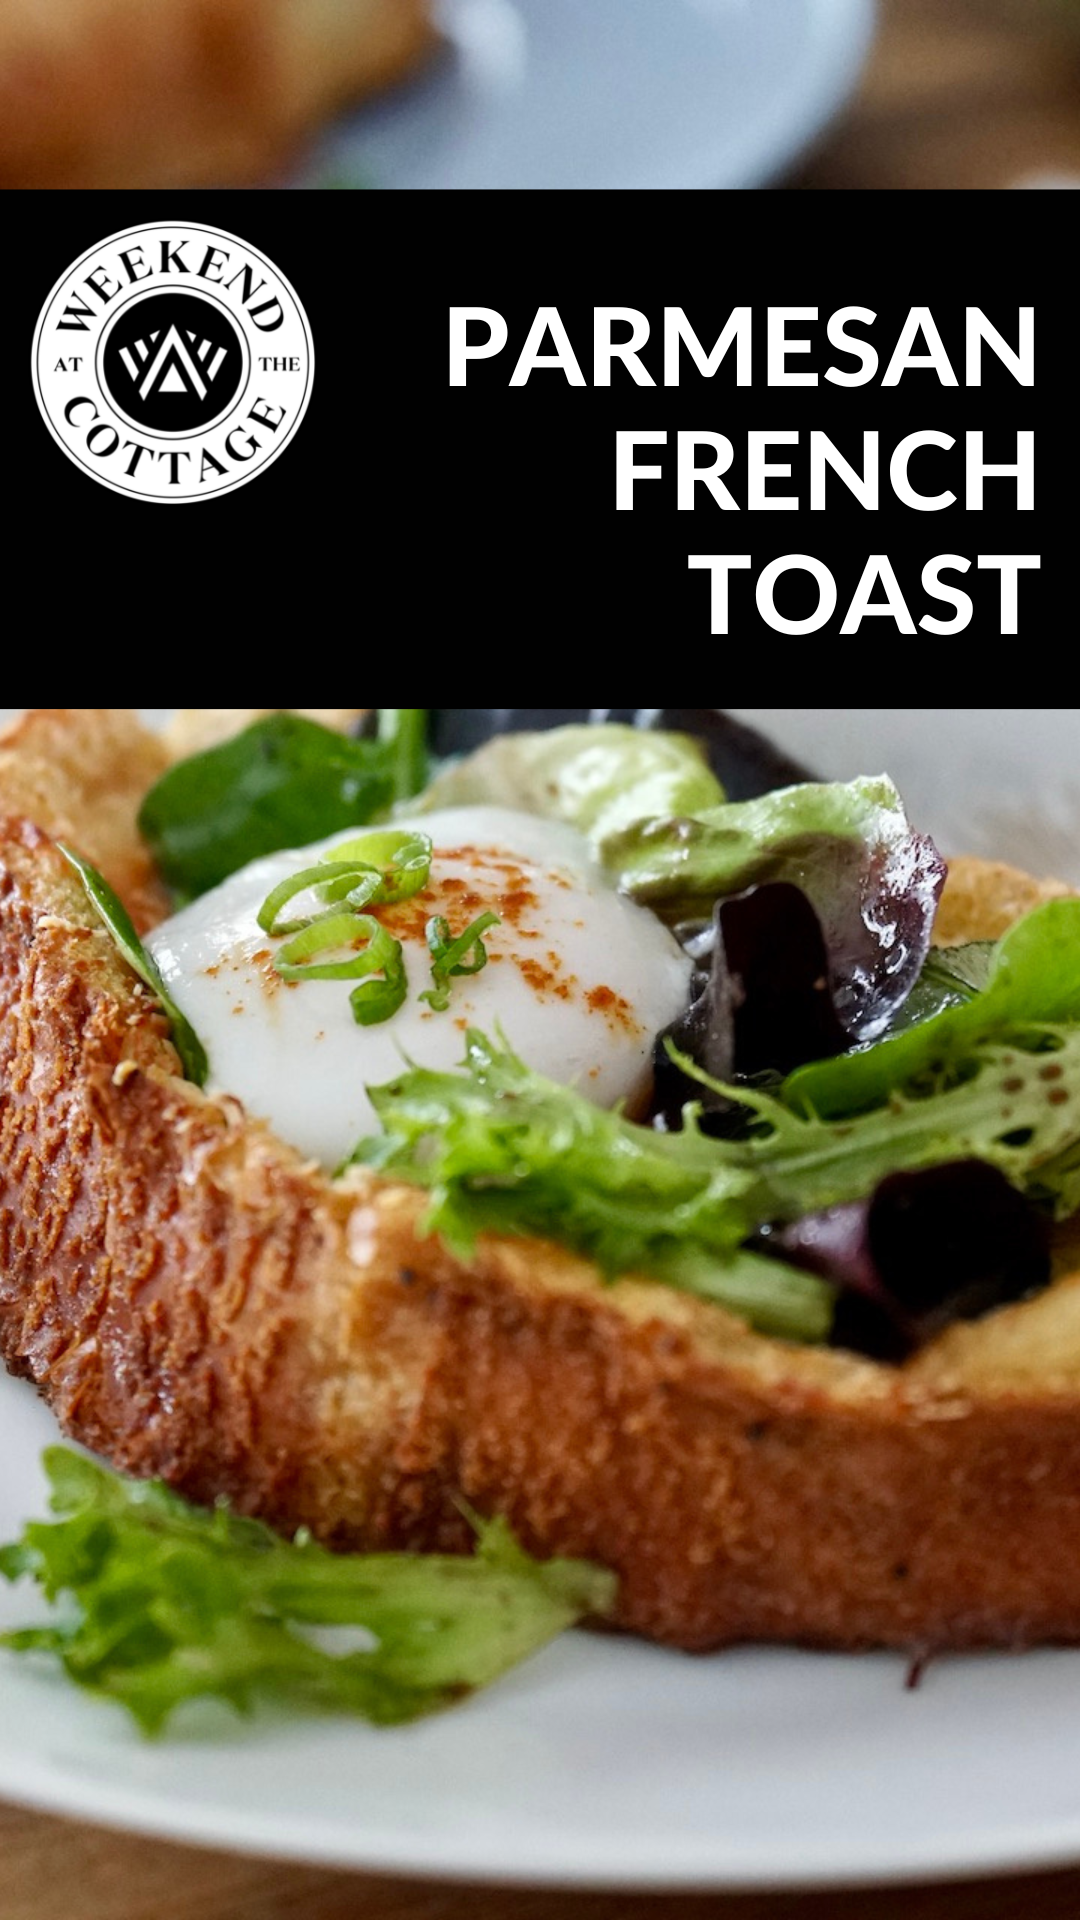 Parmesan French Toast